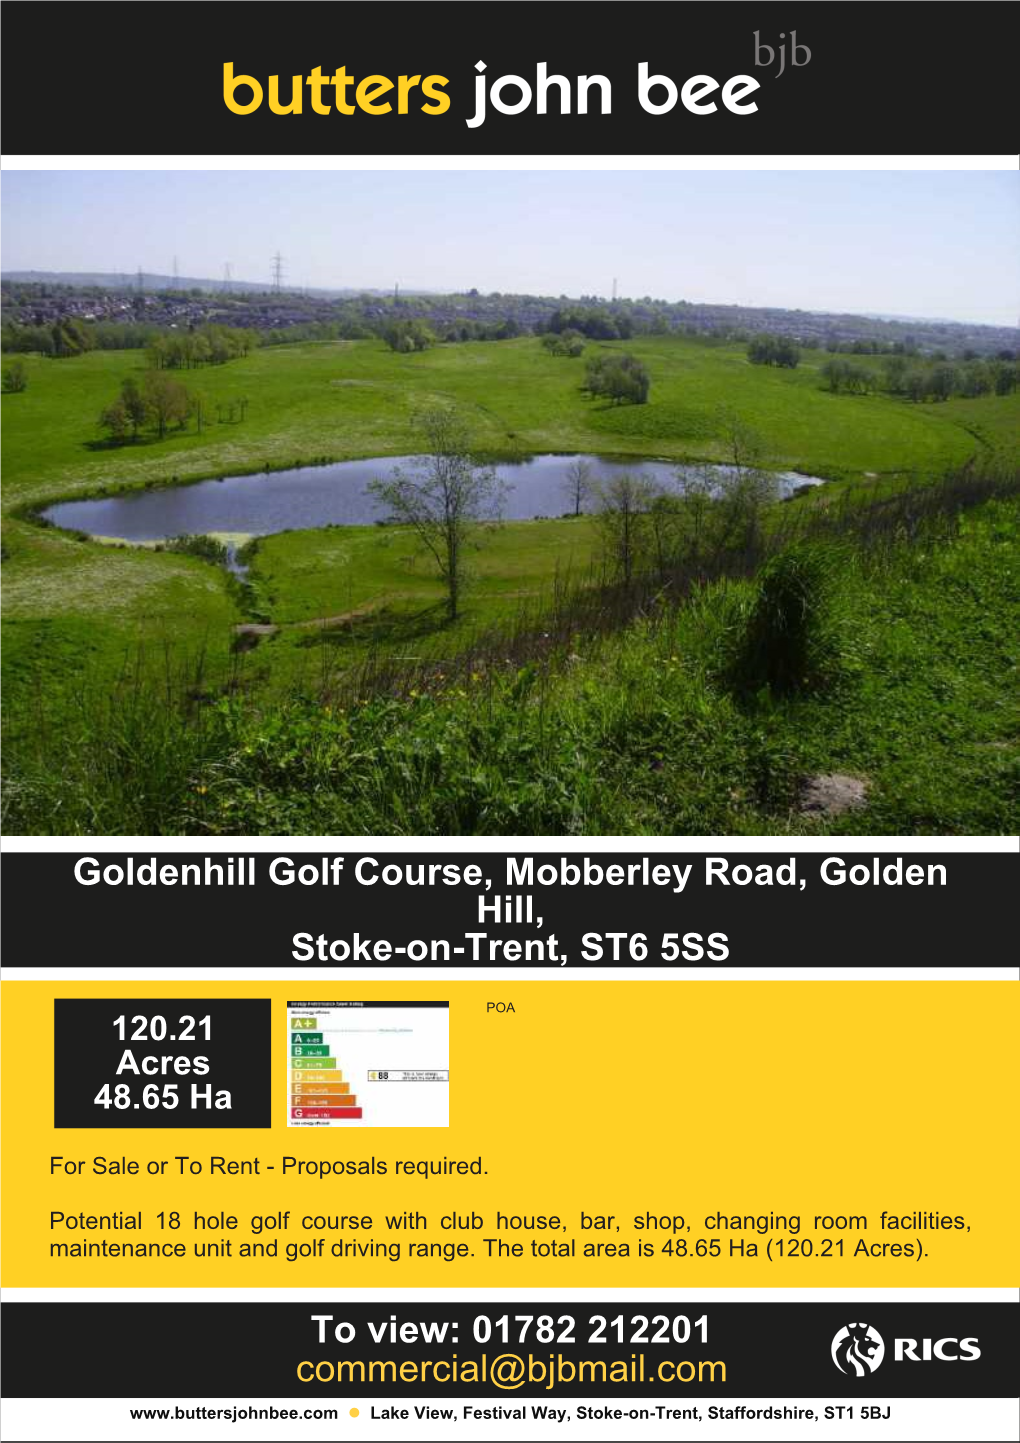 Goldenhill Golf Course, Mobberley Road, Golden Hill, Stoke-On-Trent, ST6 5SS